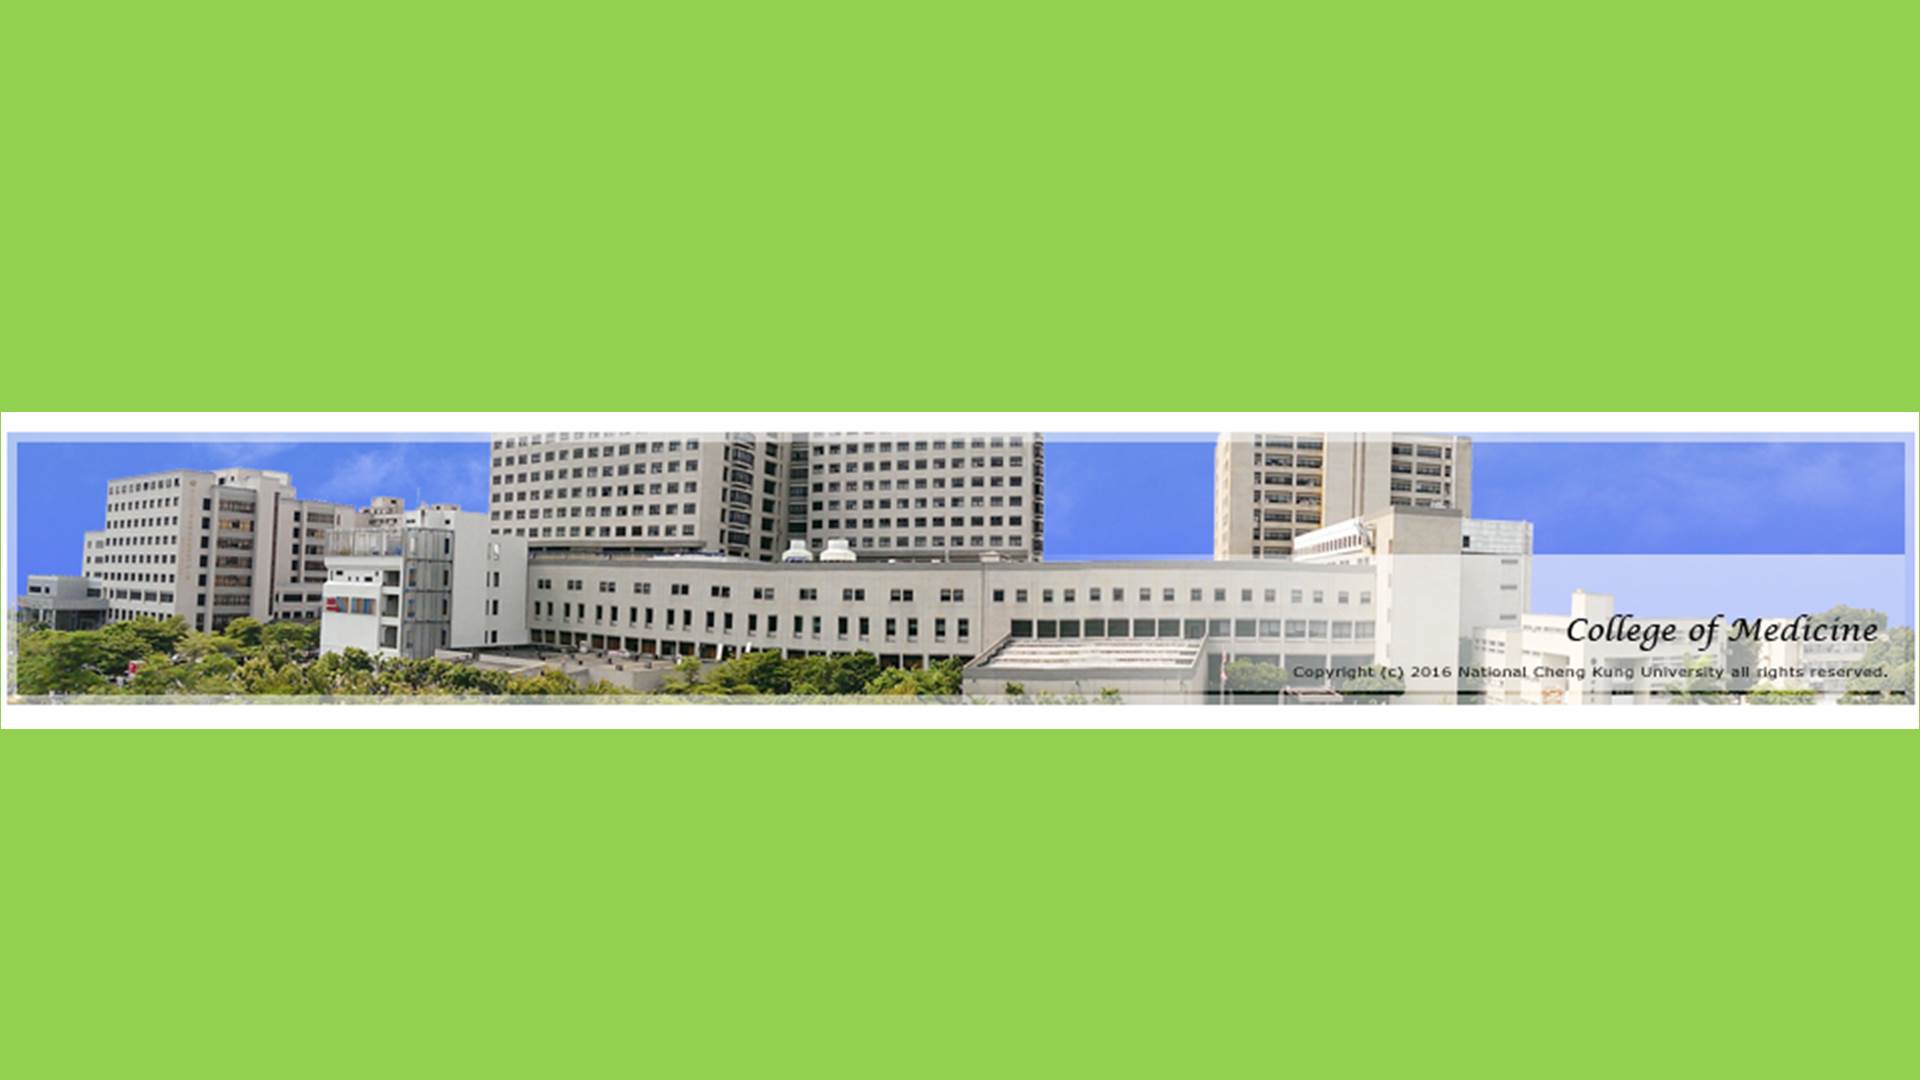 Invitation for Short Summer Course at National Cheng Kung University College of Medicine in 2019